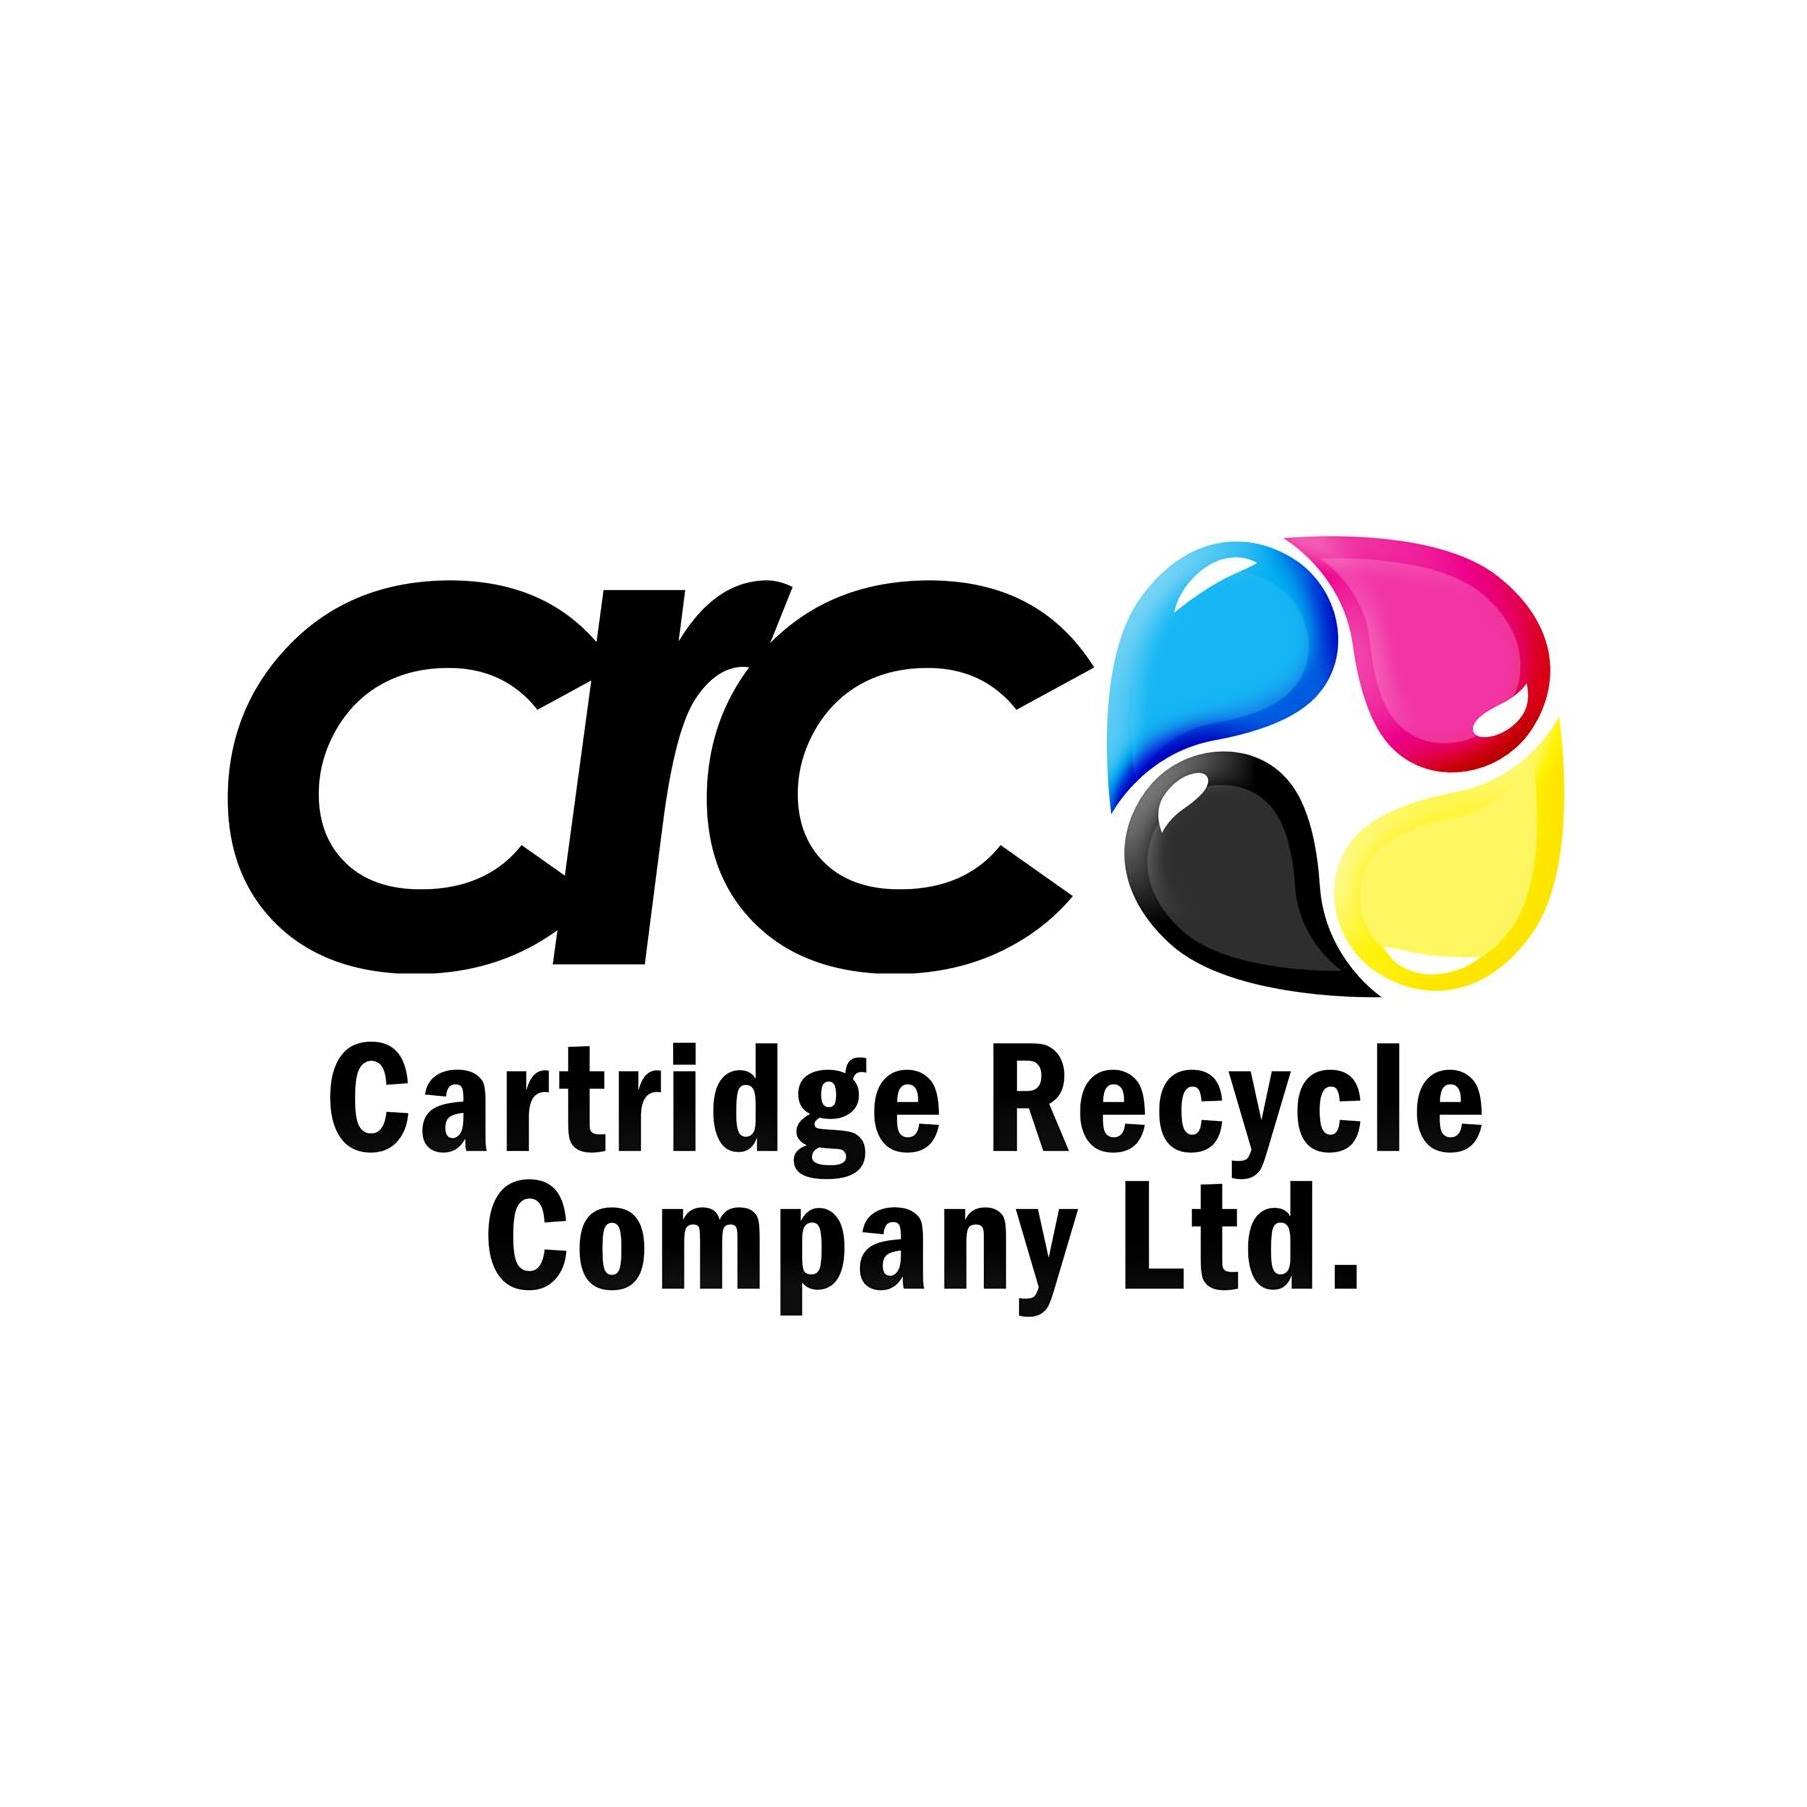 Cartridge Recycle Company Ltd. - Belize, Central America